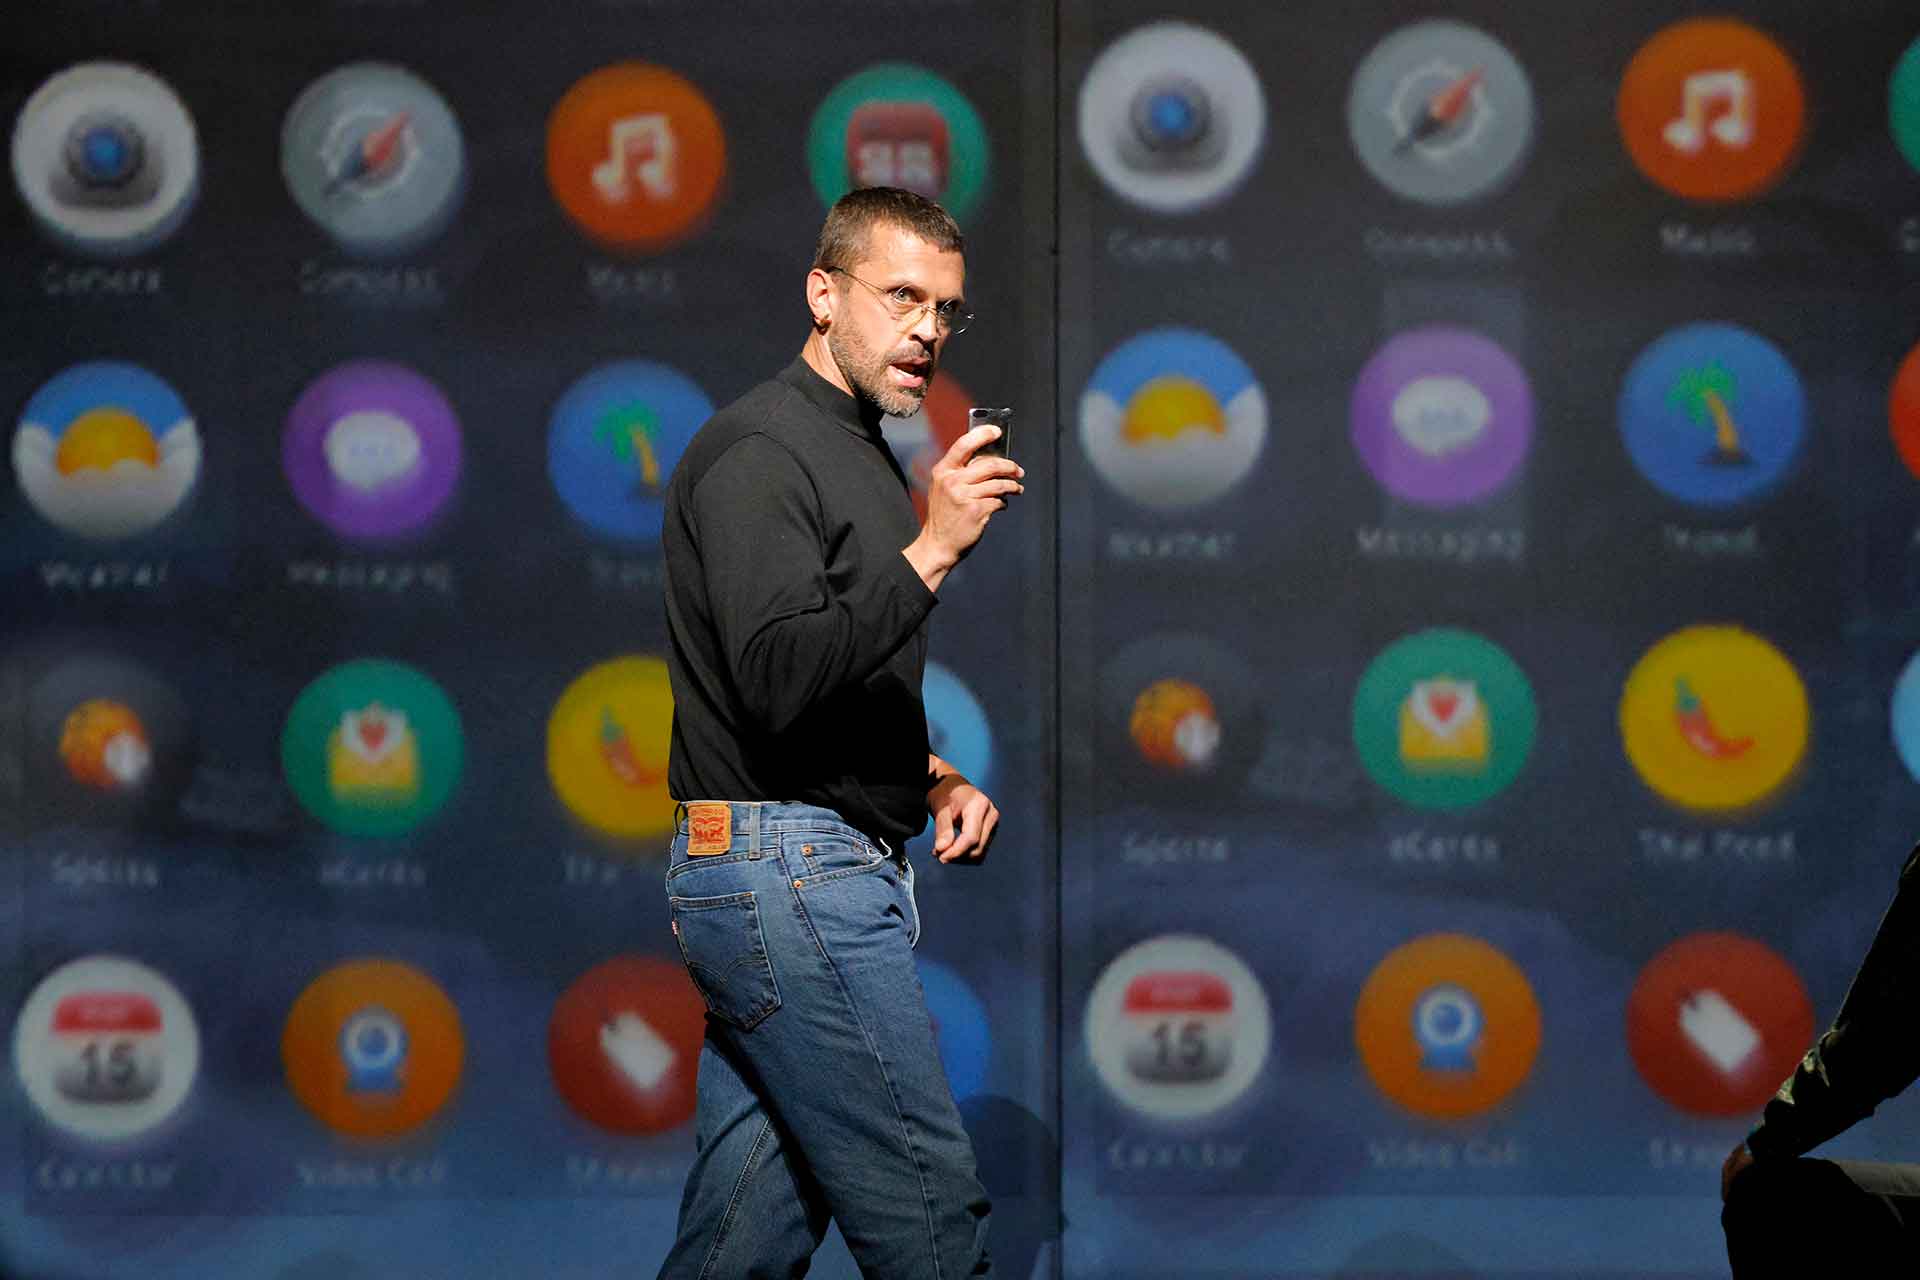 A man in a black turtleneck and jeans looks forward and to the right while holding a phone, against a backdrop of app icons